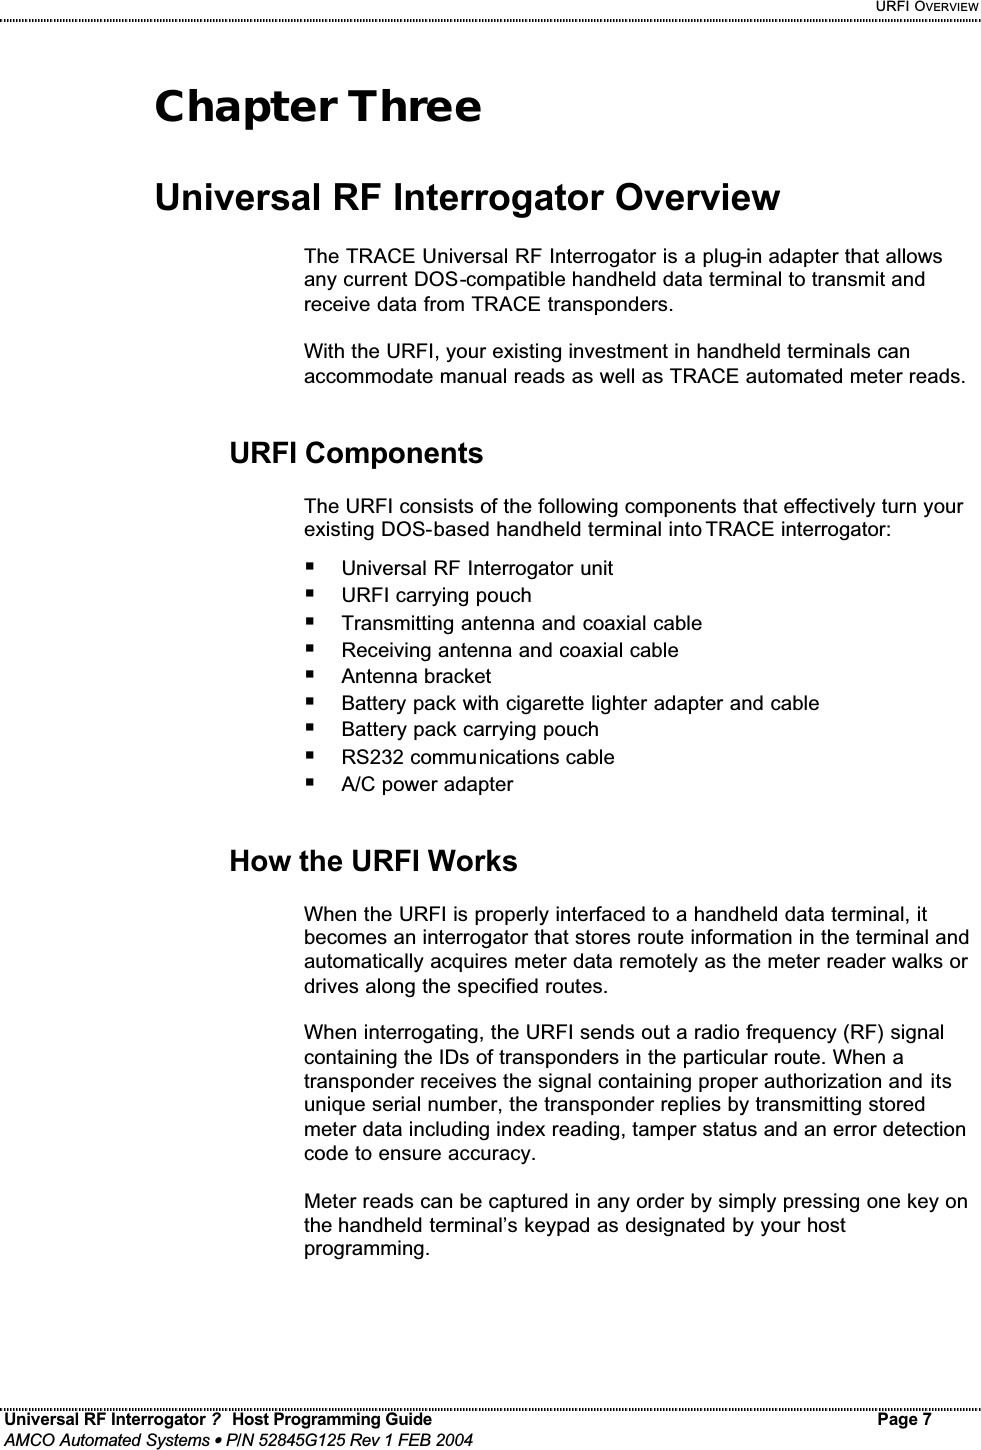     URFI OVERVIEW Universal RF Interrogator ?  Host Programming Guide Page 7  AMCO Automated Systems • P/N 52845G125 Rev 1 FEB 2004   Chapter Three  Universal RF Interrogator Overview  The TRACE Universal RF Interrogator is a plug-in adapter that allows any current DOS-compatible handheld data terminal to transmit and receive data from TRACE transponders.   With the URFI, your existing investment in handheld terminals can accommodate manual reads as well as TRACE automated meter reads.   URFI Components  The URFI consists of the following components that effectively turn your existing DOS-based handheld terminal into TRACE interrogator: ! Universal RF Interrogator unit ! URFI carrying pouch ! Transmitting antenna and coaxial cable ! Receiving antenna and coaxial cable ! Antenna bracket ! Battery pack with cigarette lighter adapter and cable ! Battery pack carrying pouch ! RS232 communications cable ! A/C power adapter   How the URFI Works  When the URFI is properly interfaced to a handheld data terminal, it becomes an interrogator that stores route information in the terminal and automatically acquires meter data remotely as the meter reader walks or drives along the specified routes.   When interrogating, the URFI sends out a radio frequency (RF) signal containing the IDs of transponders in the particular route. When a transponder receives the signal containing proper authorization and its unique serial number, the transponder replies by transmitting stored meter data including index reading, tamper status and an error detection code to ensure accuracy.  Meter reads can be captured in any order by simply pressing one key on the handheld terminal’s keypad as designated by your host programming.  